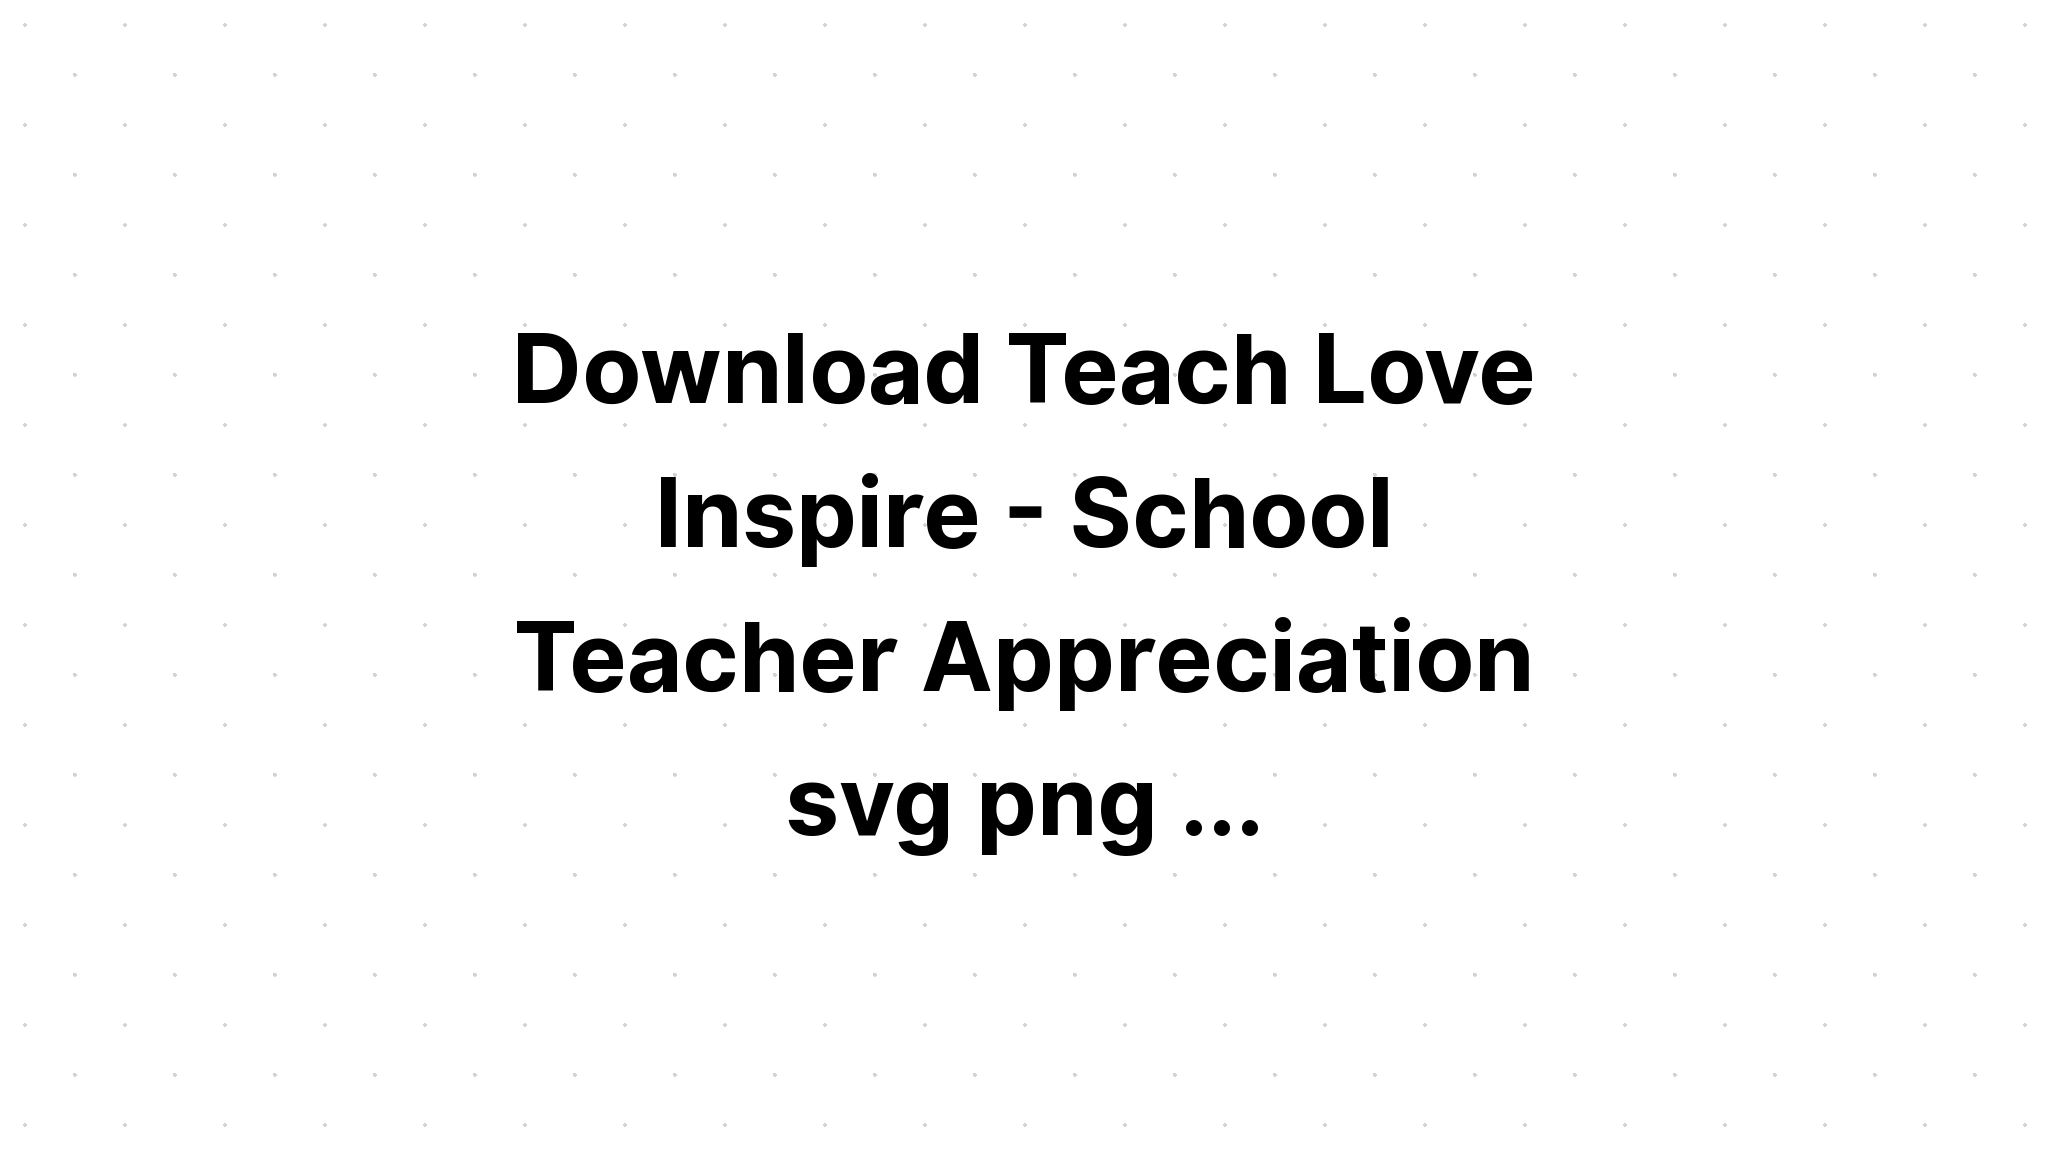 Download Teach Love Inspire Free Svg - Layered SVG Cut File